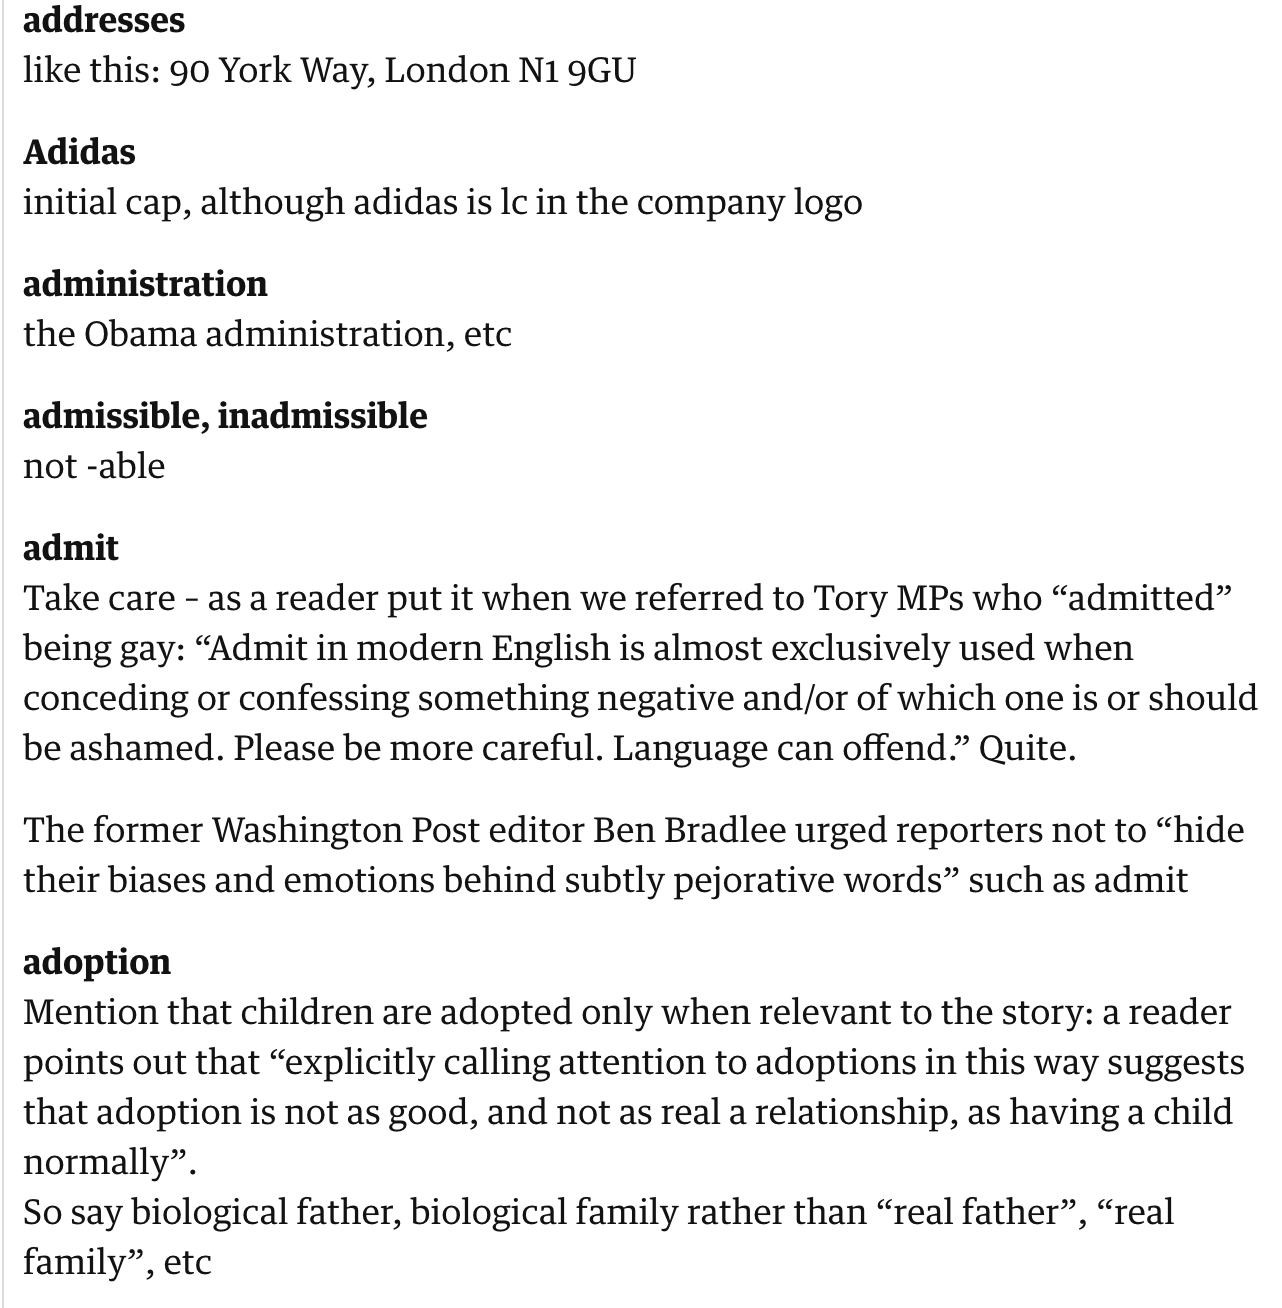 Guardian style guide extract. Full transcript below under summary field labelled 'Open transcript of image'